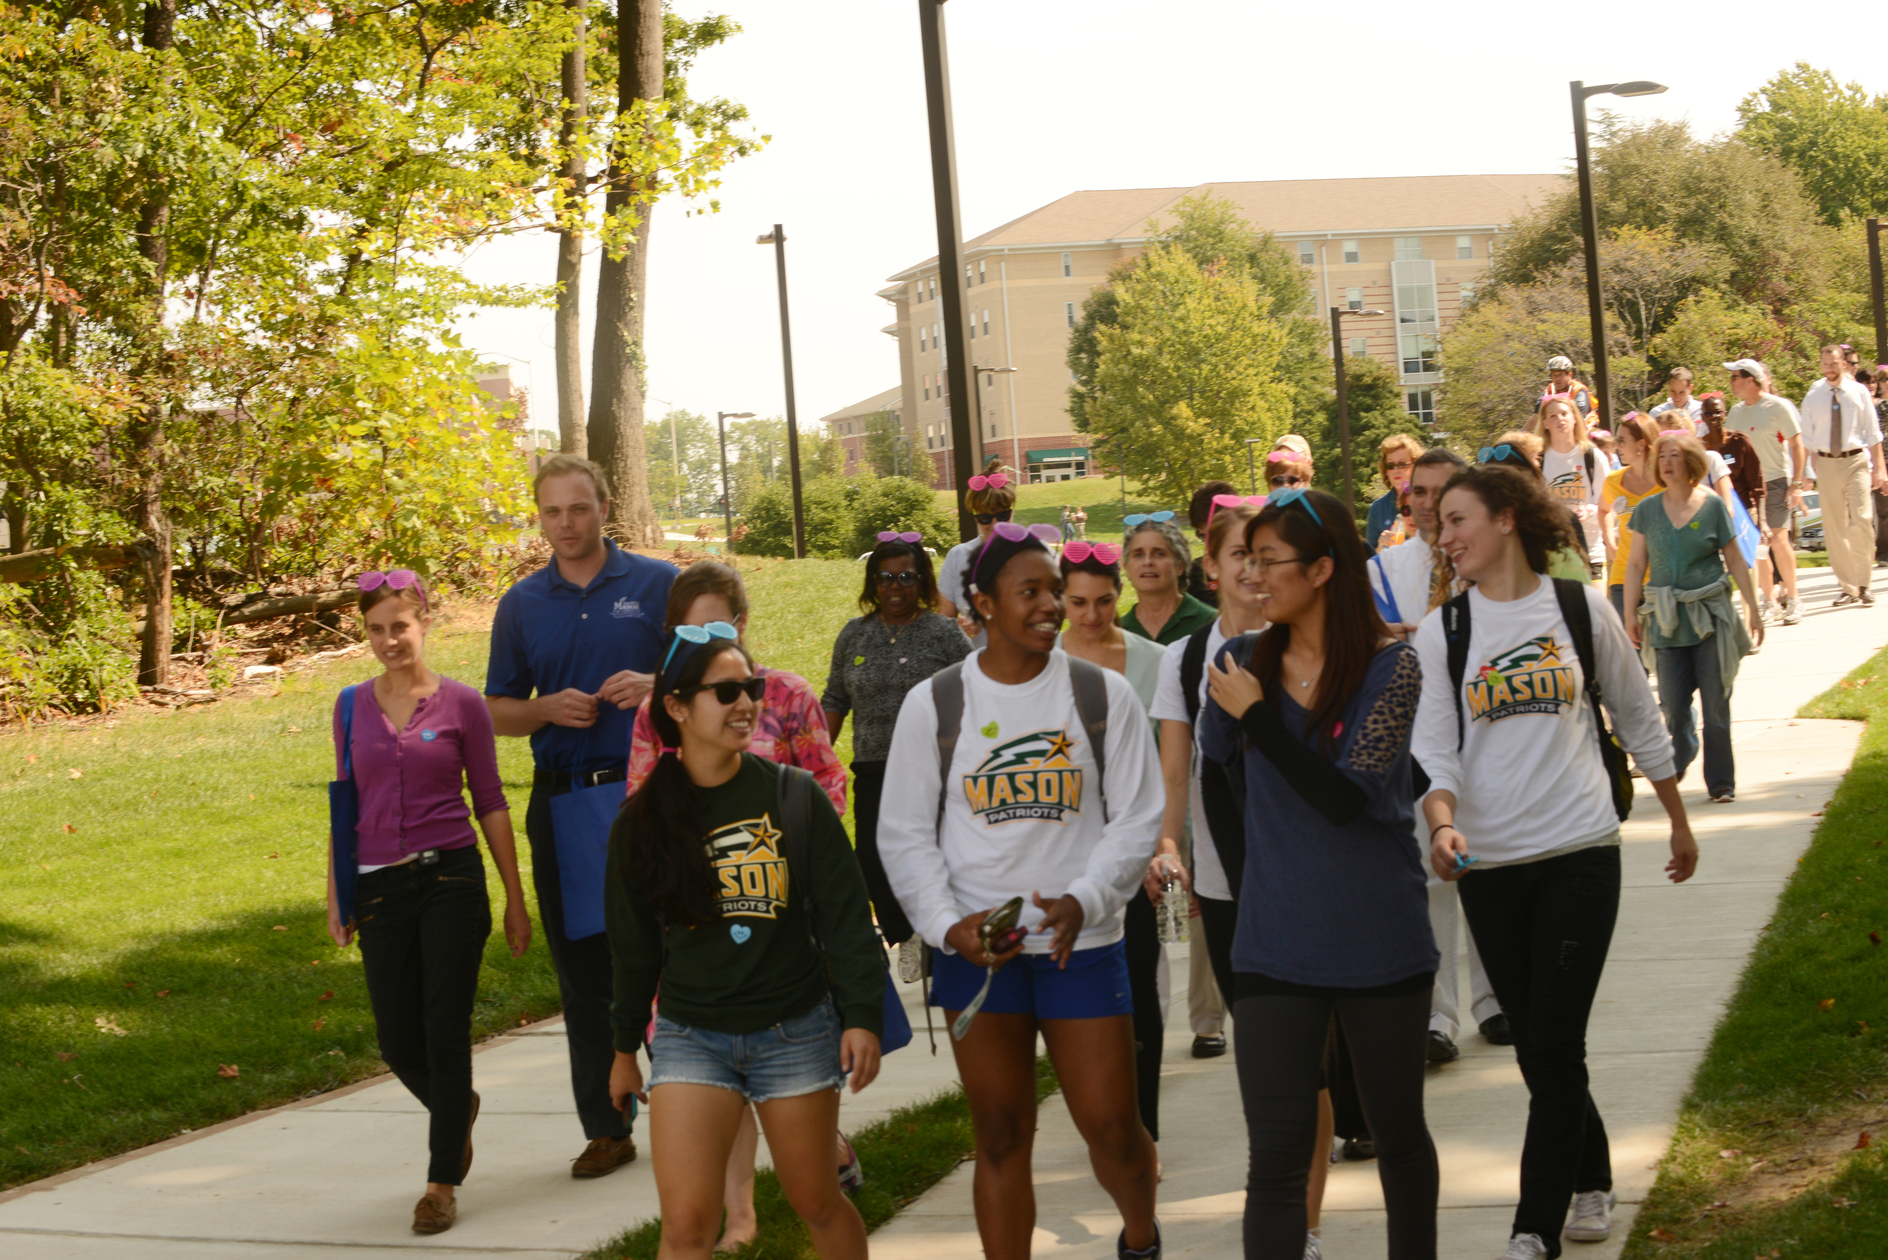 Students, faculty, and staff participate in the 4th annual Happy Heart Walk. The event sponsored by Wellness at Mason promotes preventive health screenings tand encourages healthy choices in general wellness and exercise. Photo by Evan Cantwell/Creative Services/George Mason University